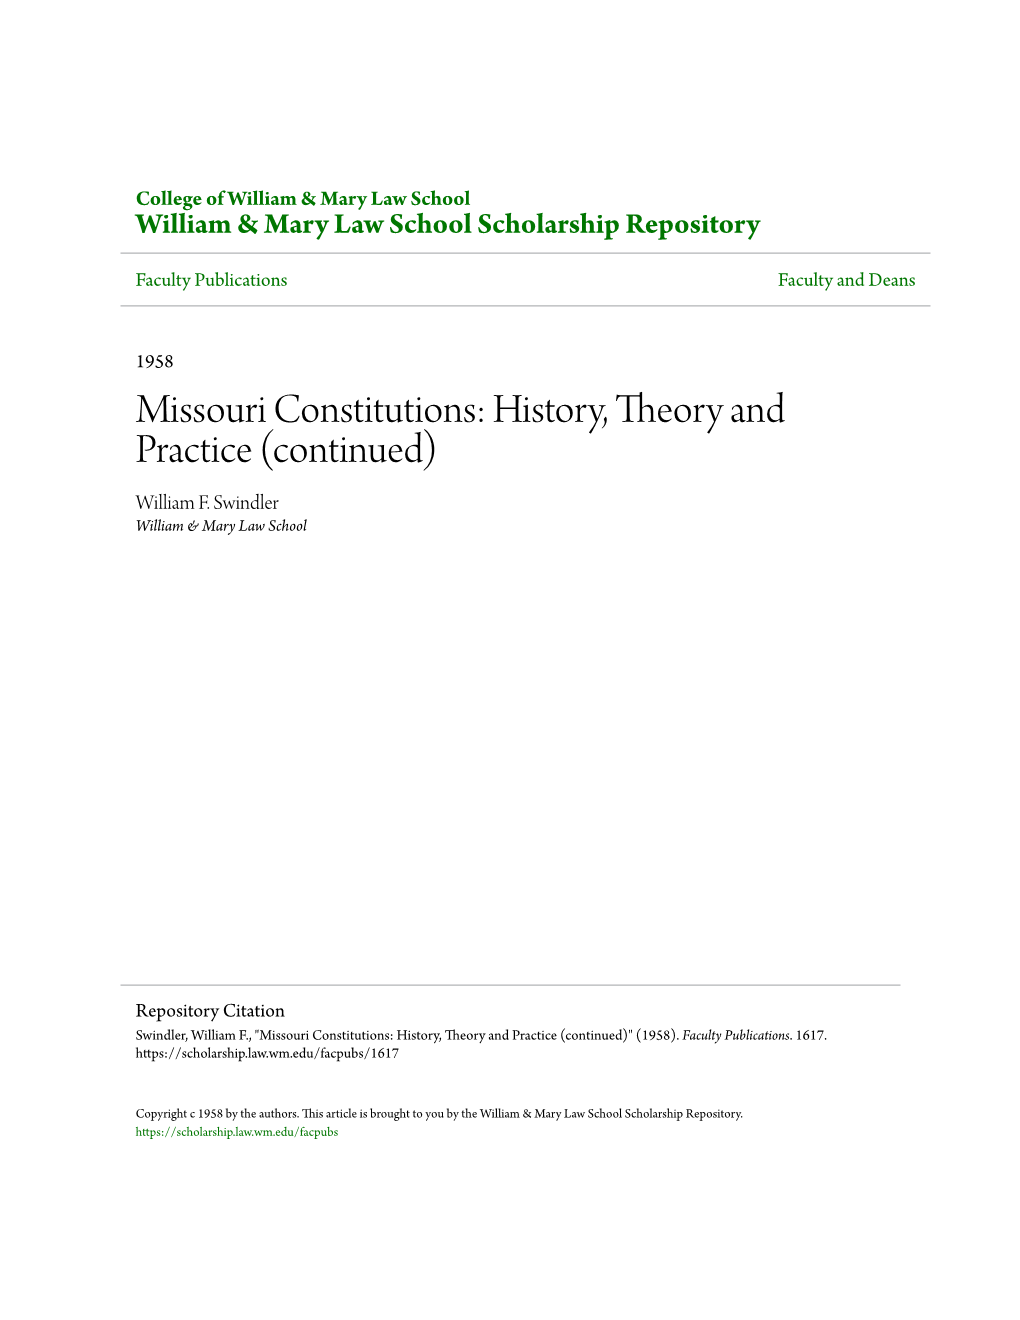 Missouri Constitutions: History, Theory and Practice (Continued) William F